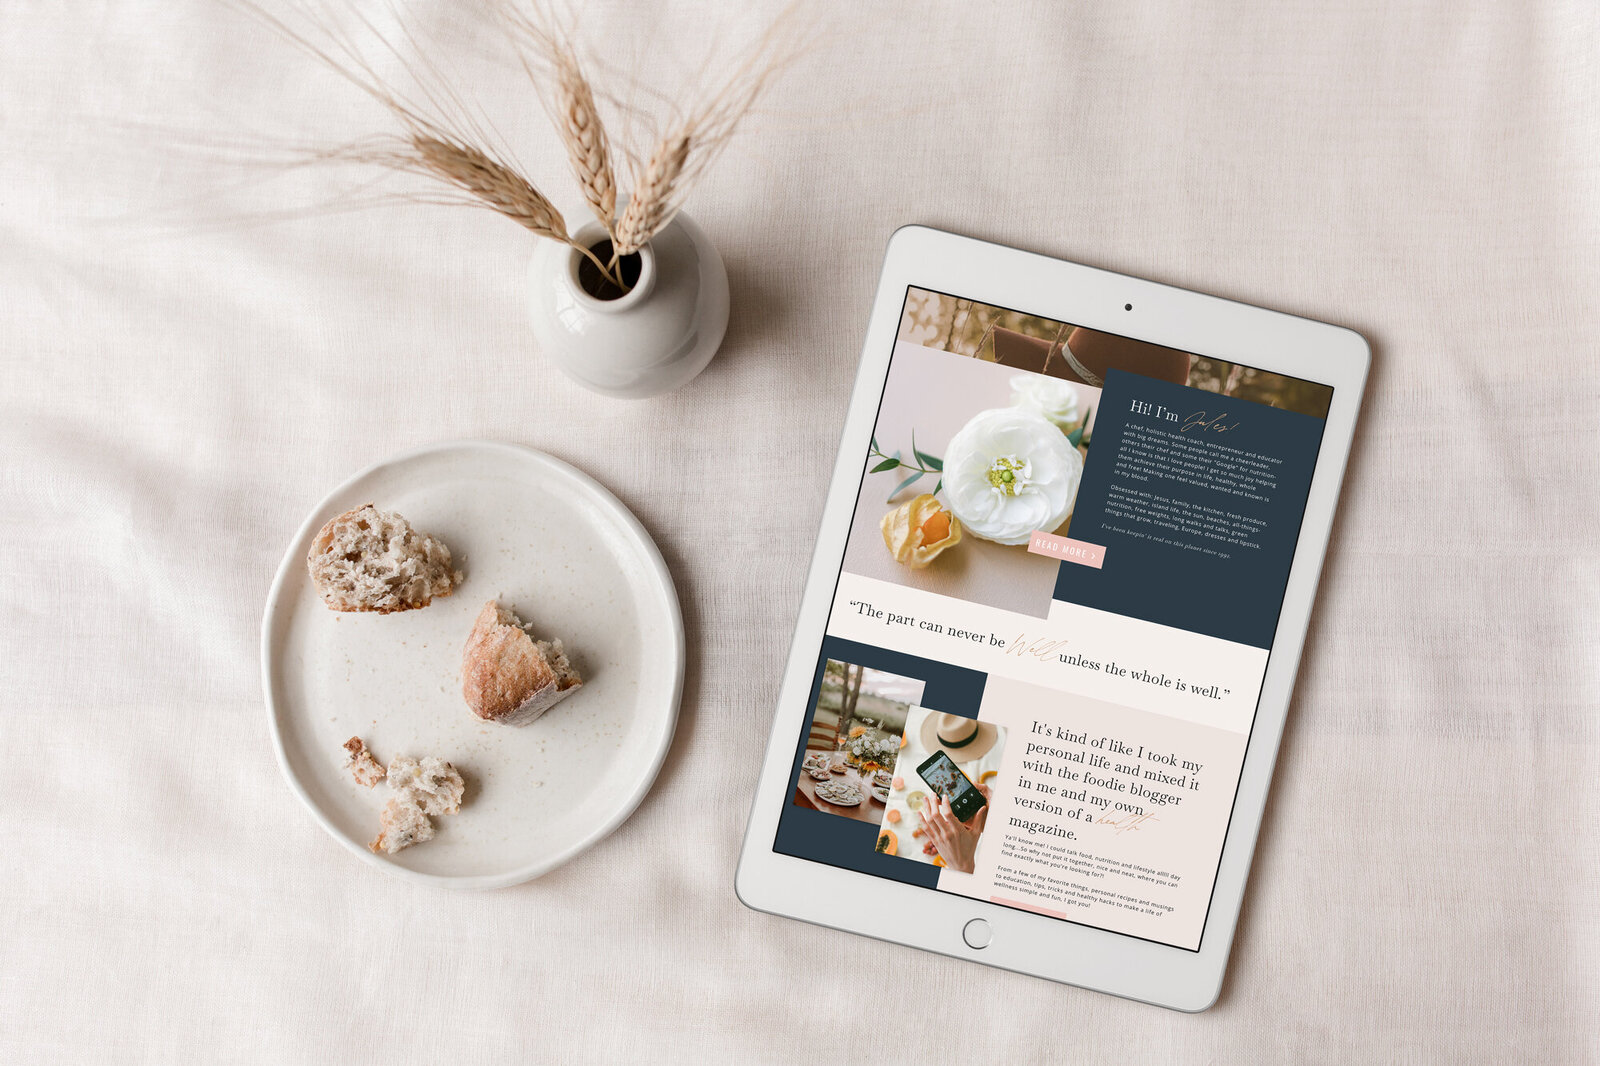 An inviting portrayal of the digital storytelling crafted by The Agency, as seen on this tablet, offering users a journey through wellness and nourishment narratives.